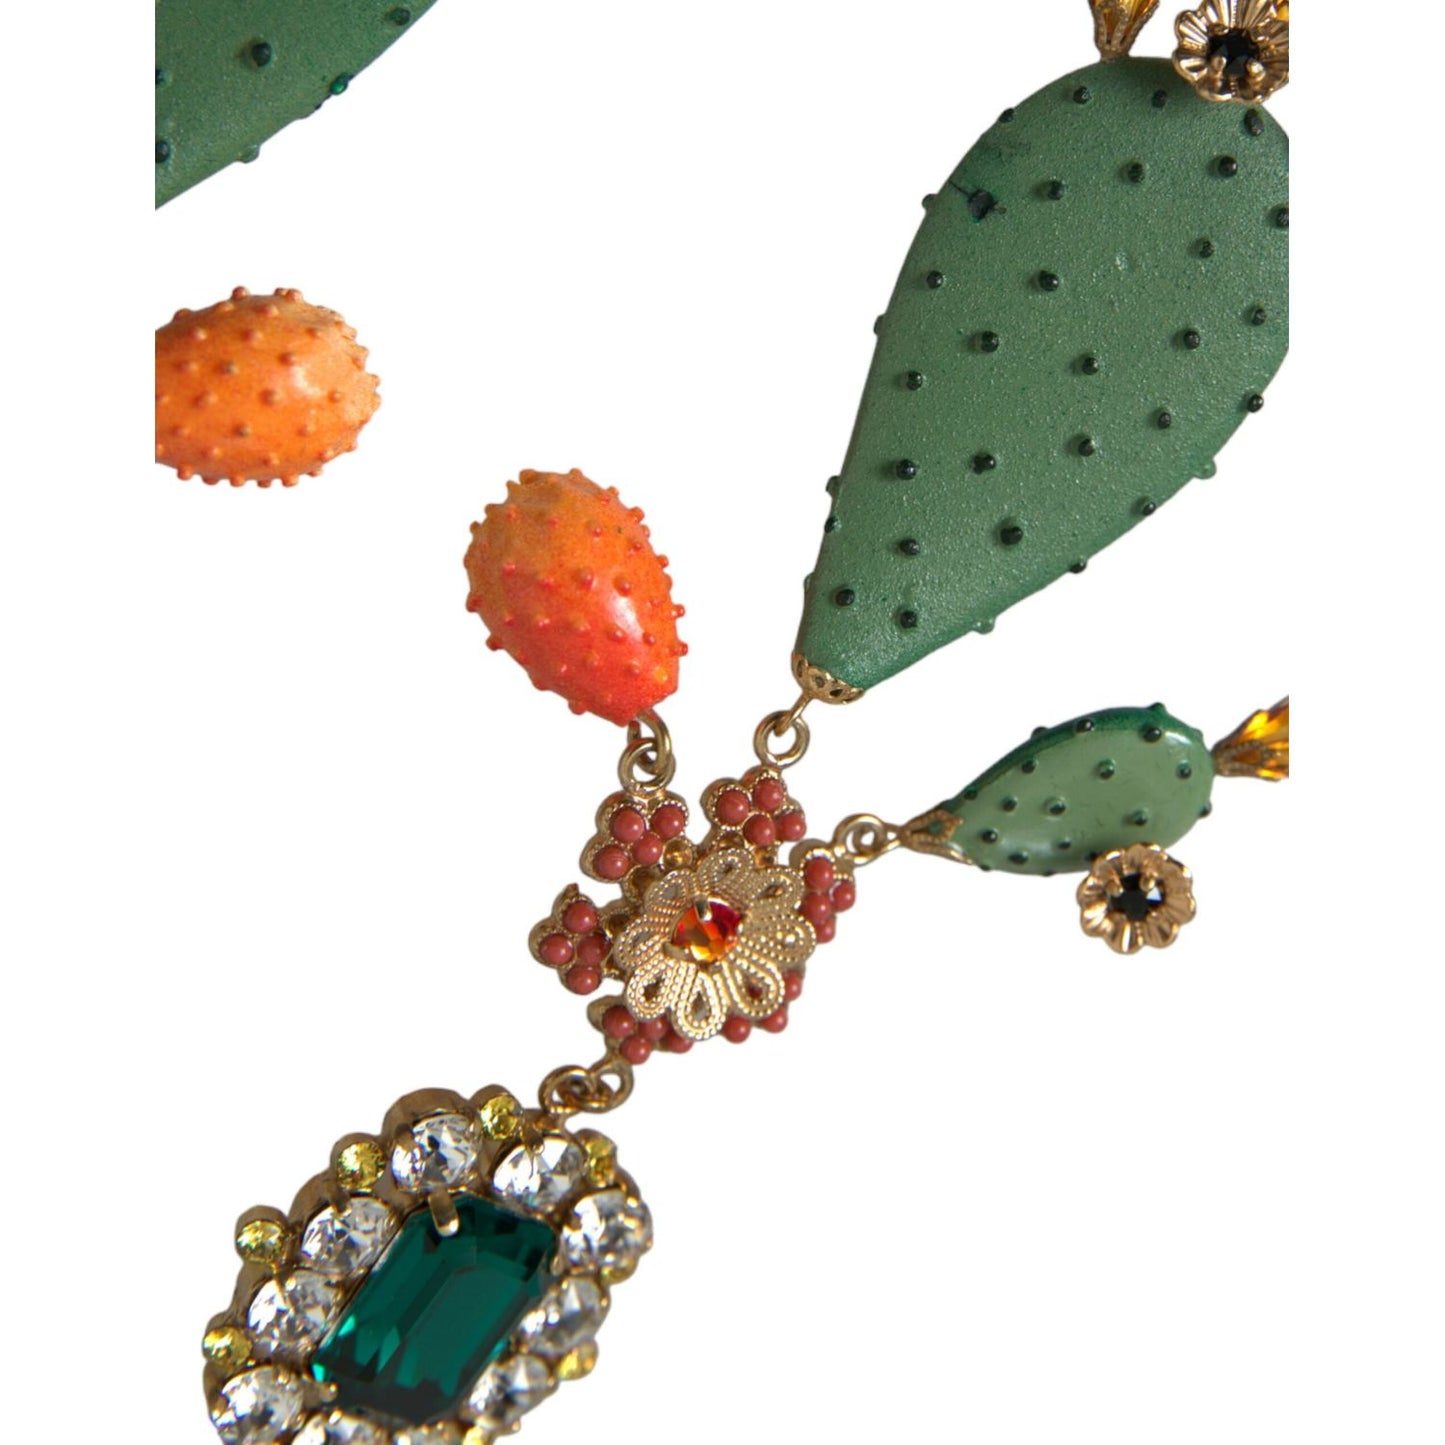 Green Cactus Crystal Clip On Jewelry Dangling Earrings Dolce & Gabbana